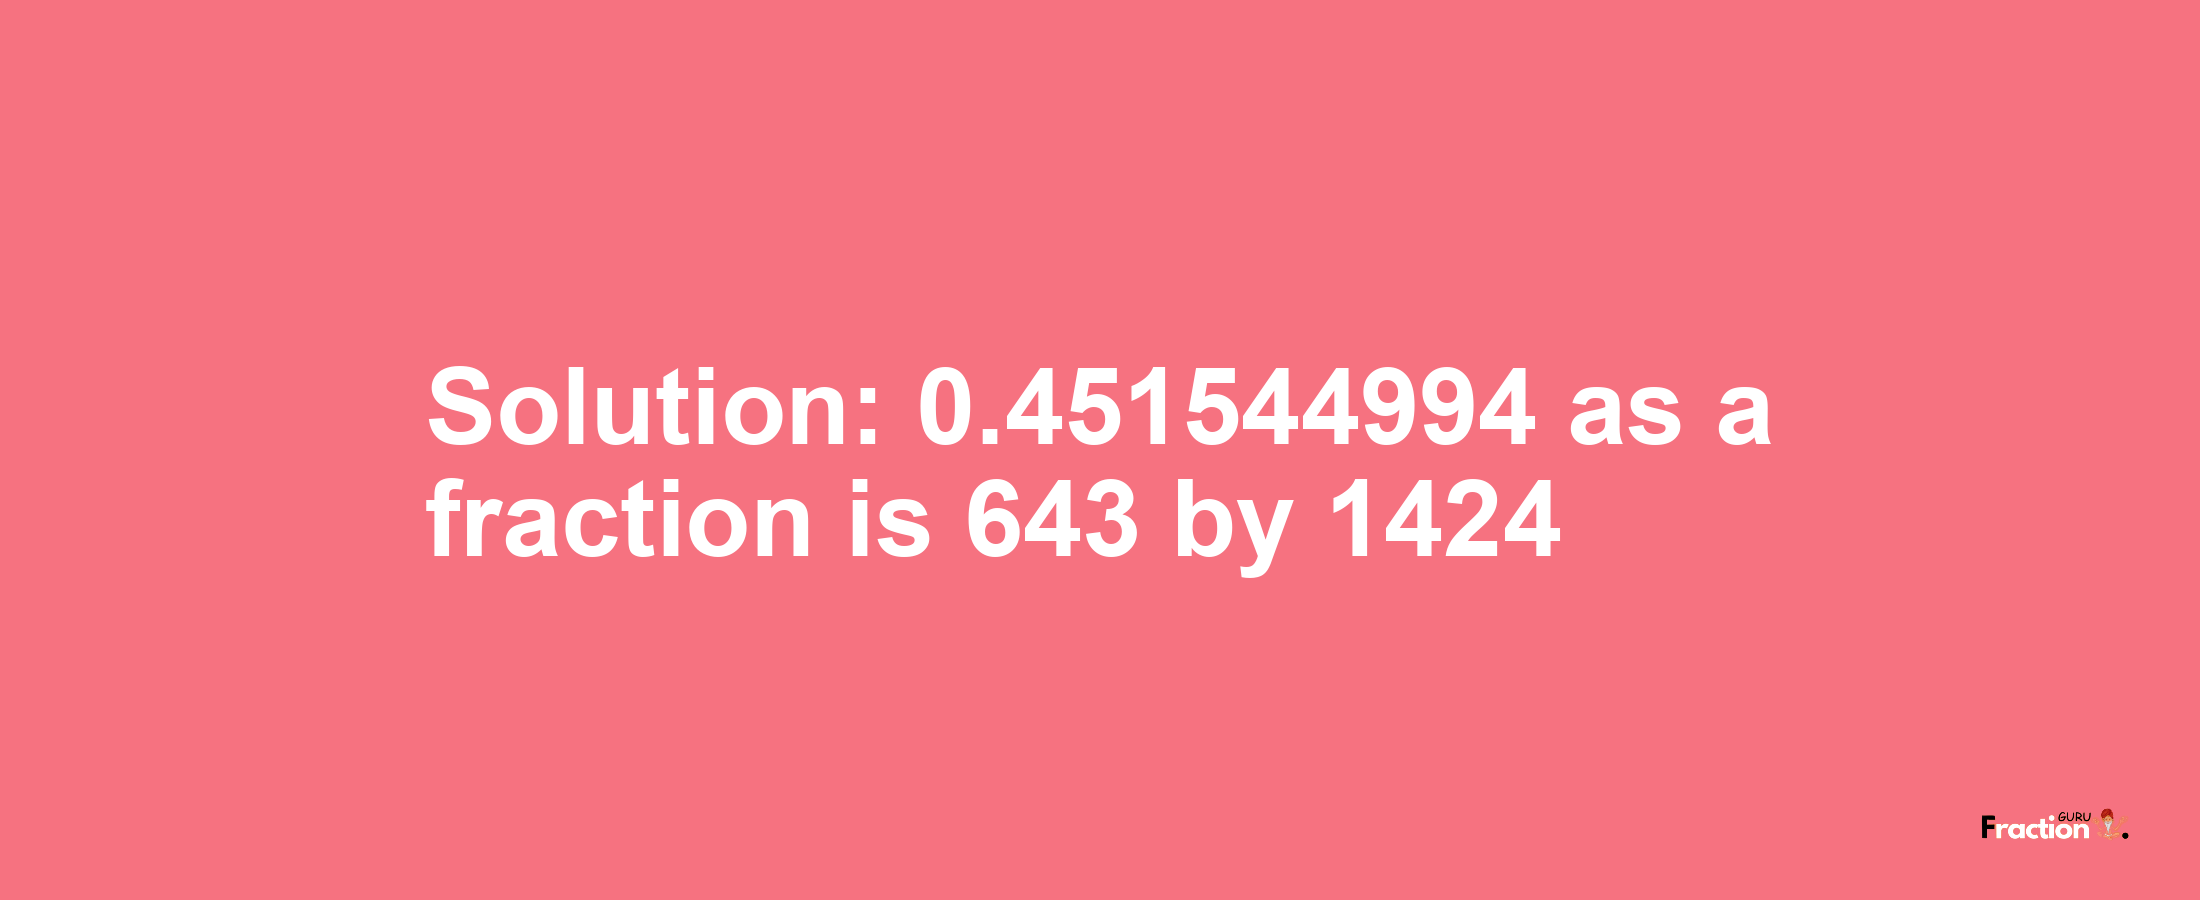 Solution:0.451544994 as a fraction is 643/1424